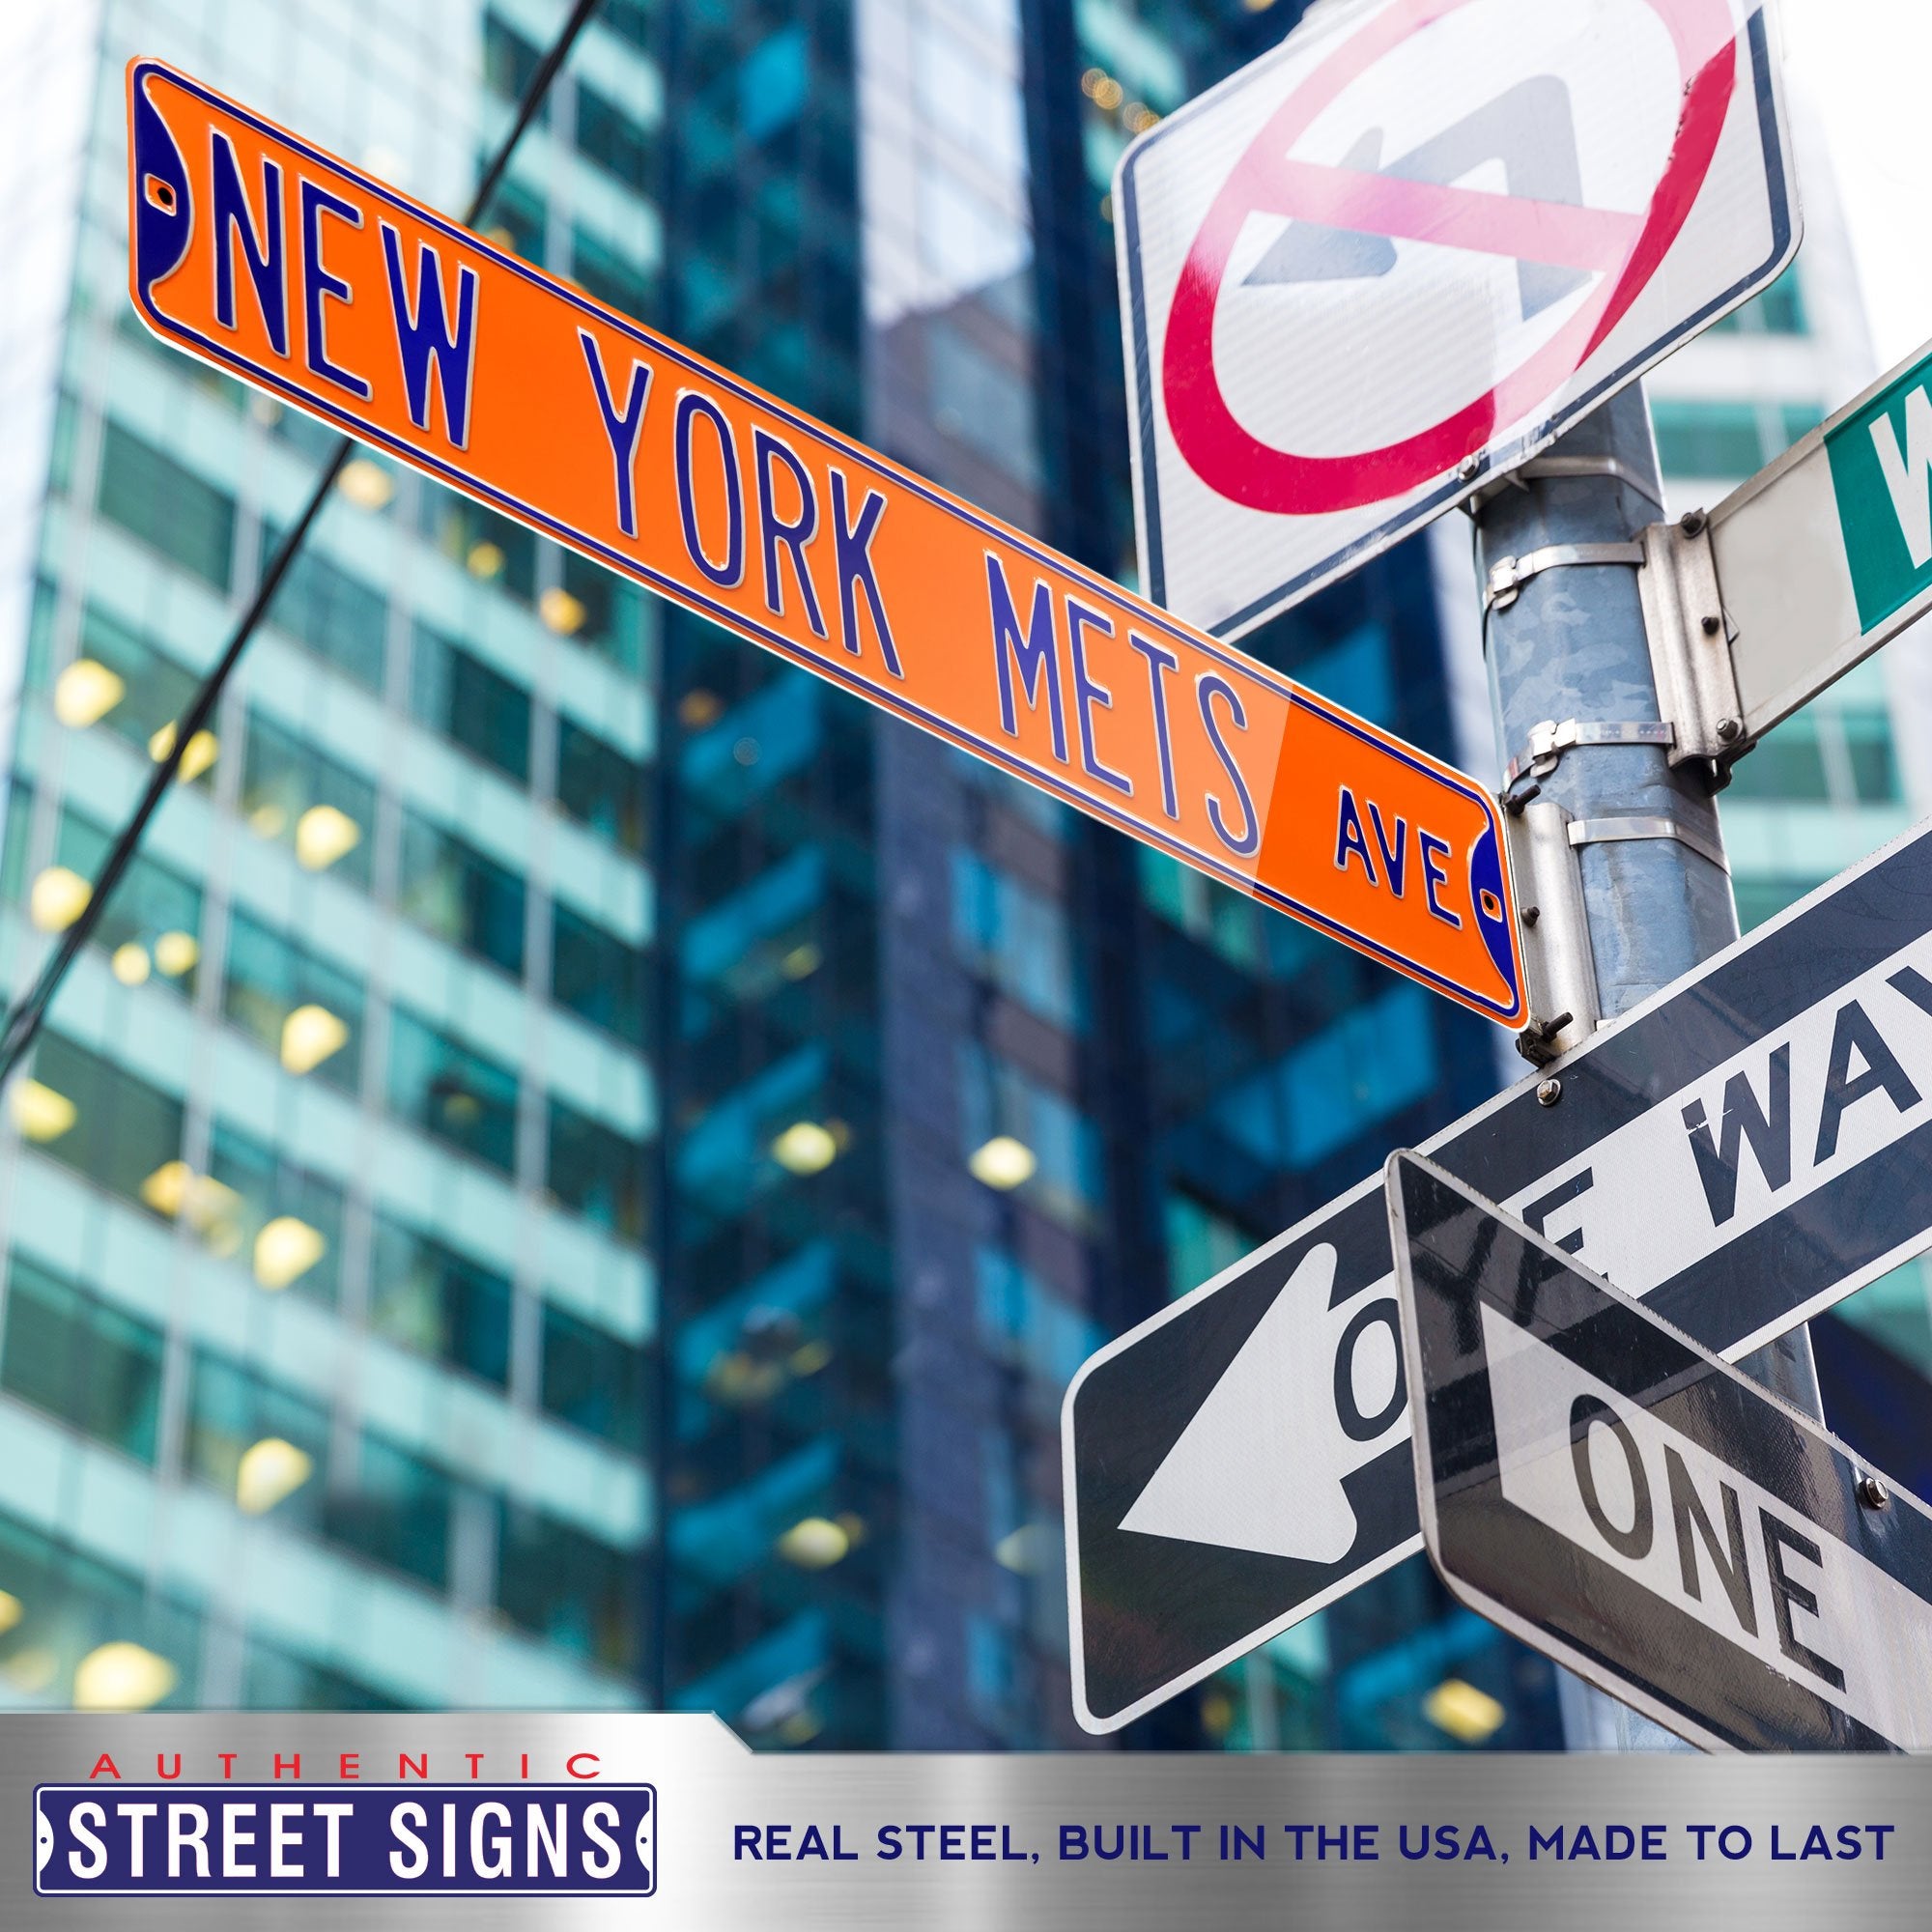 New York Mets Steel Street Sign-NEW YORK METS AVE on Orange 36" W x 6" H by Fathead